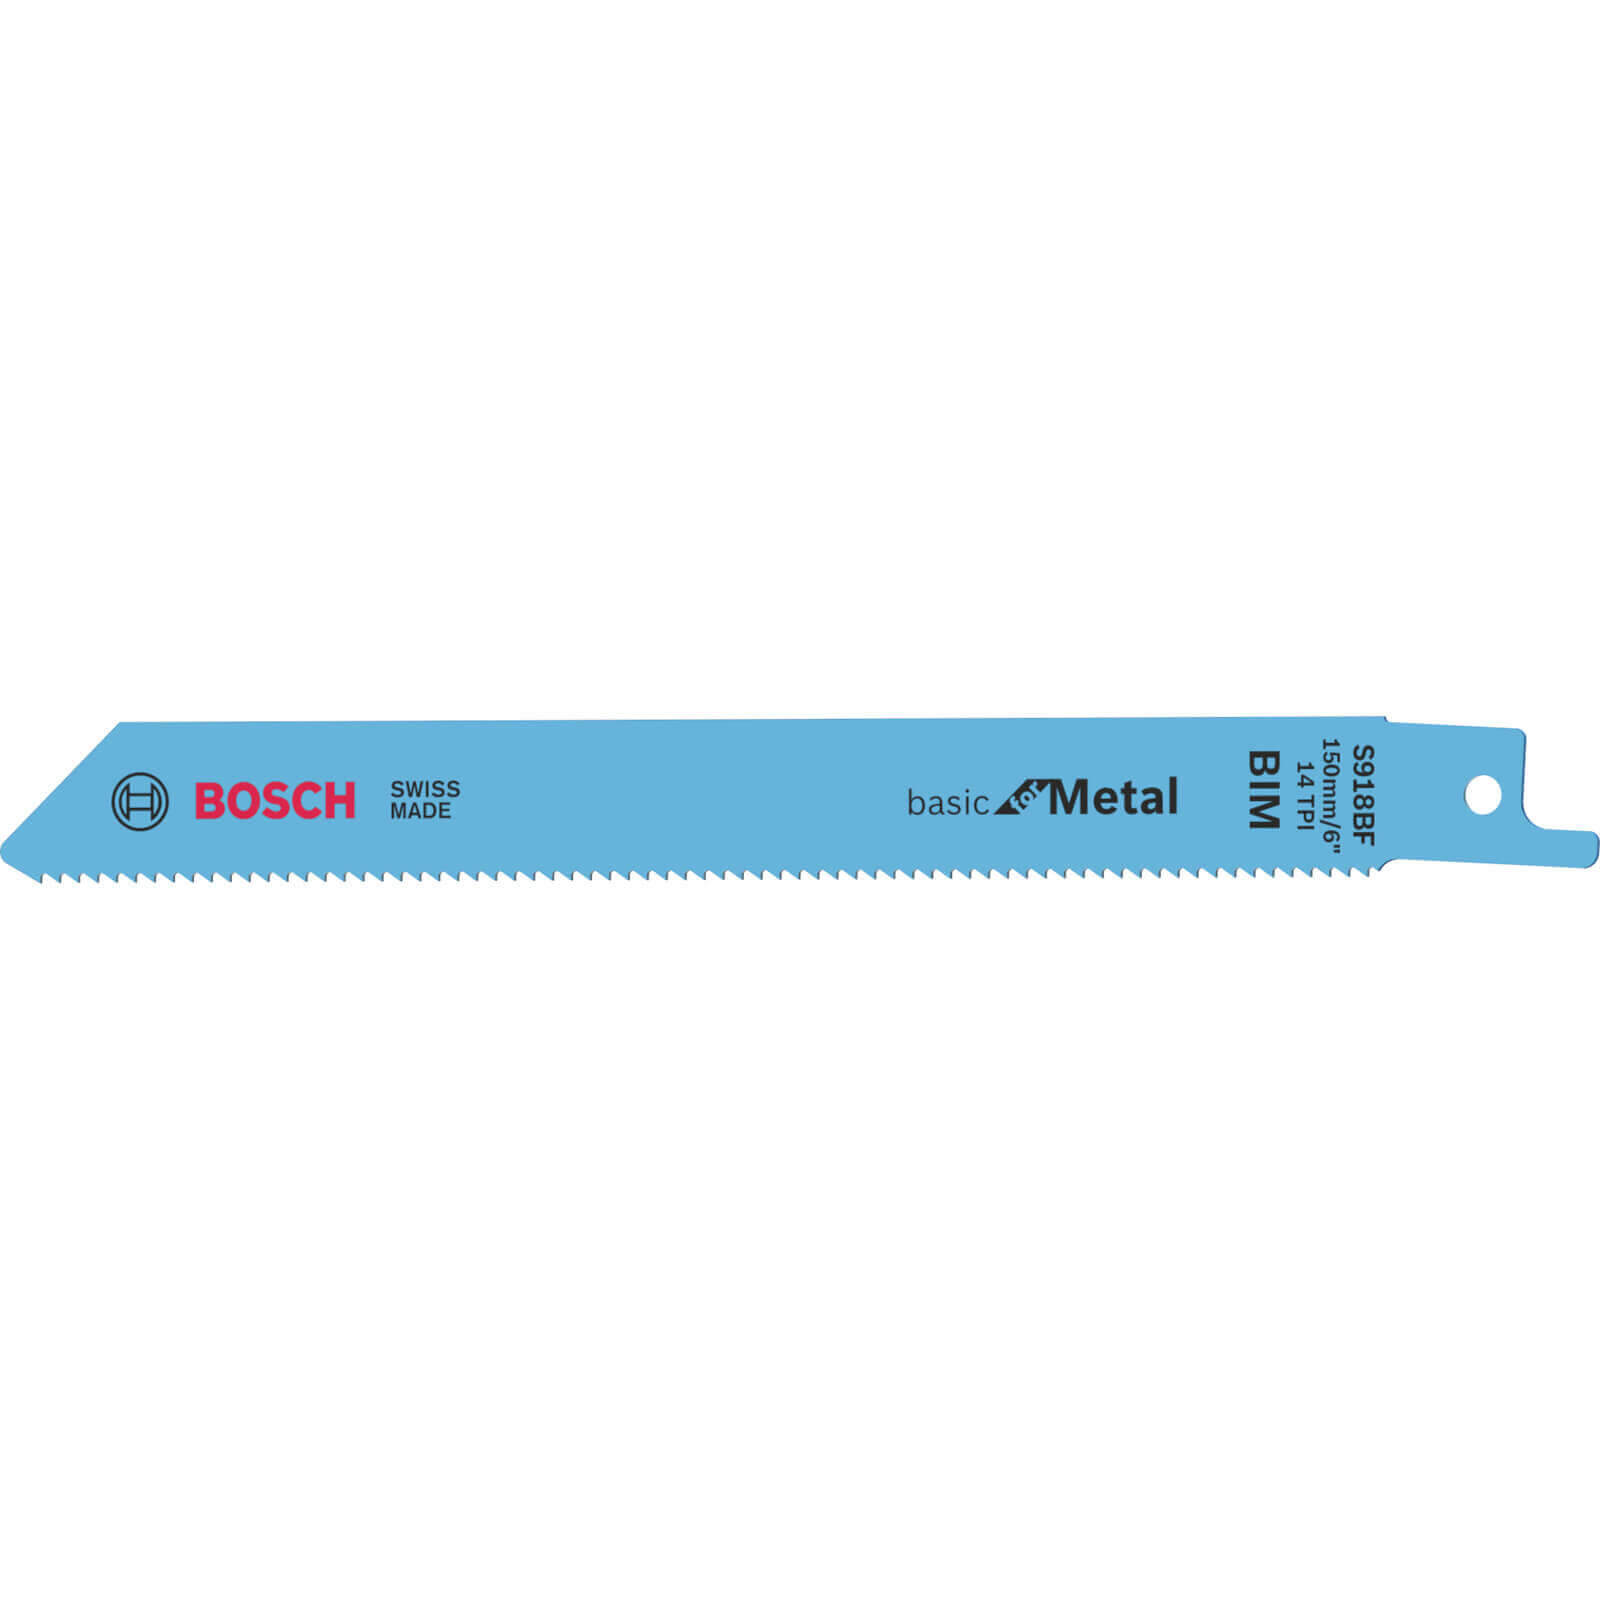 Image of Bosch S918B Metal Cutting Reciprocating Sabre Saw Blades Pack of 5